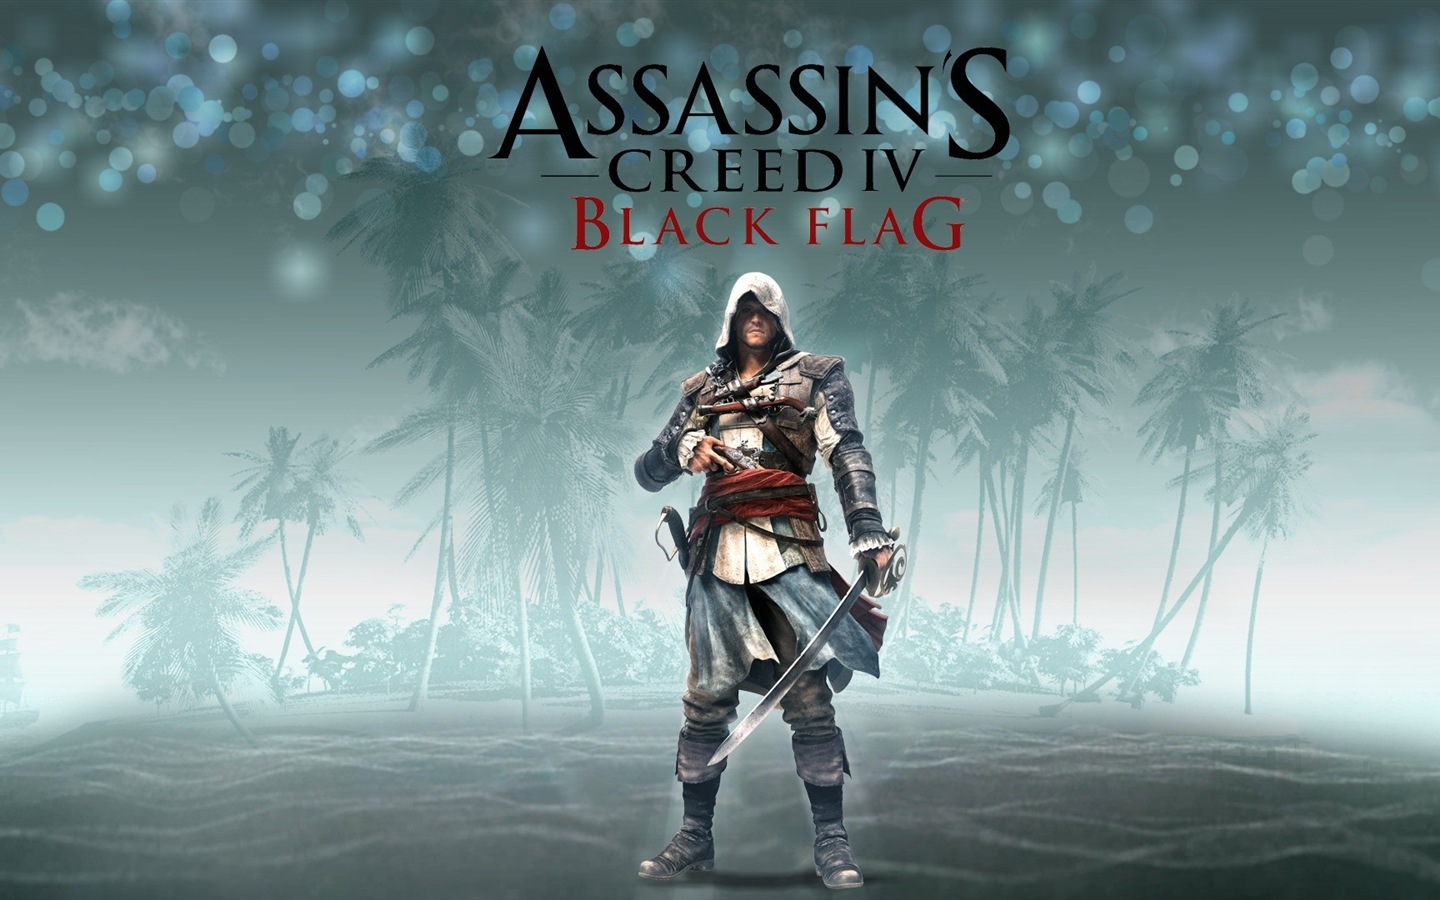 Creed IV Assassin: Black Flag HD wallpapers #14 - 1440x900